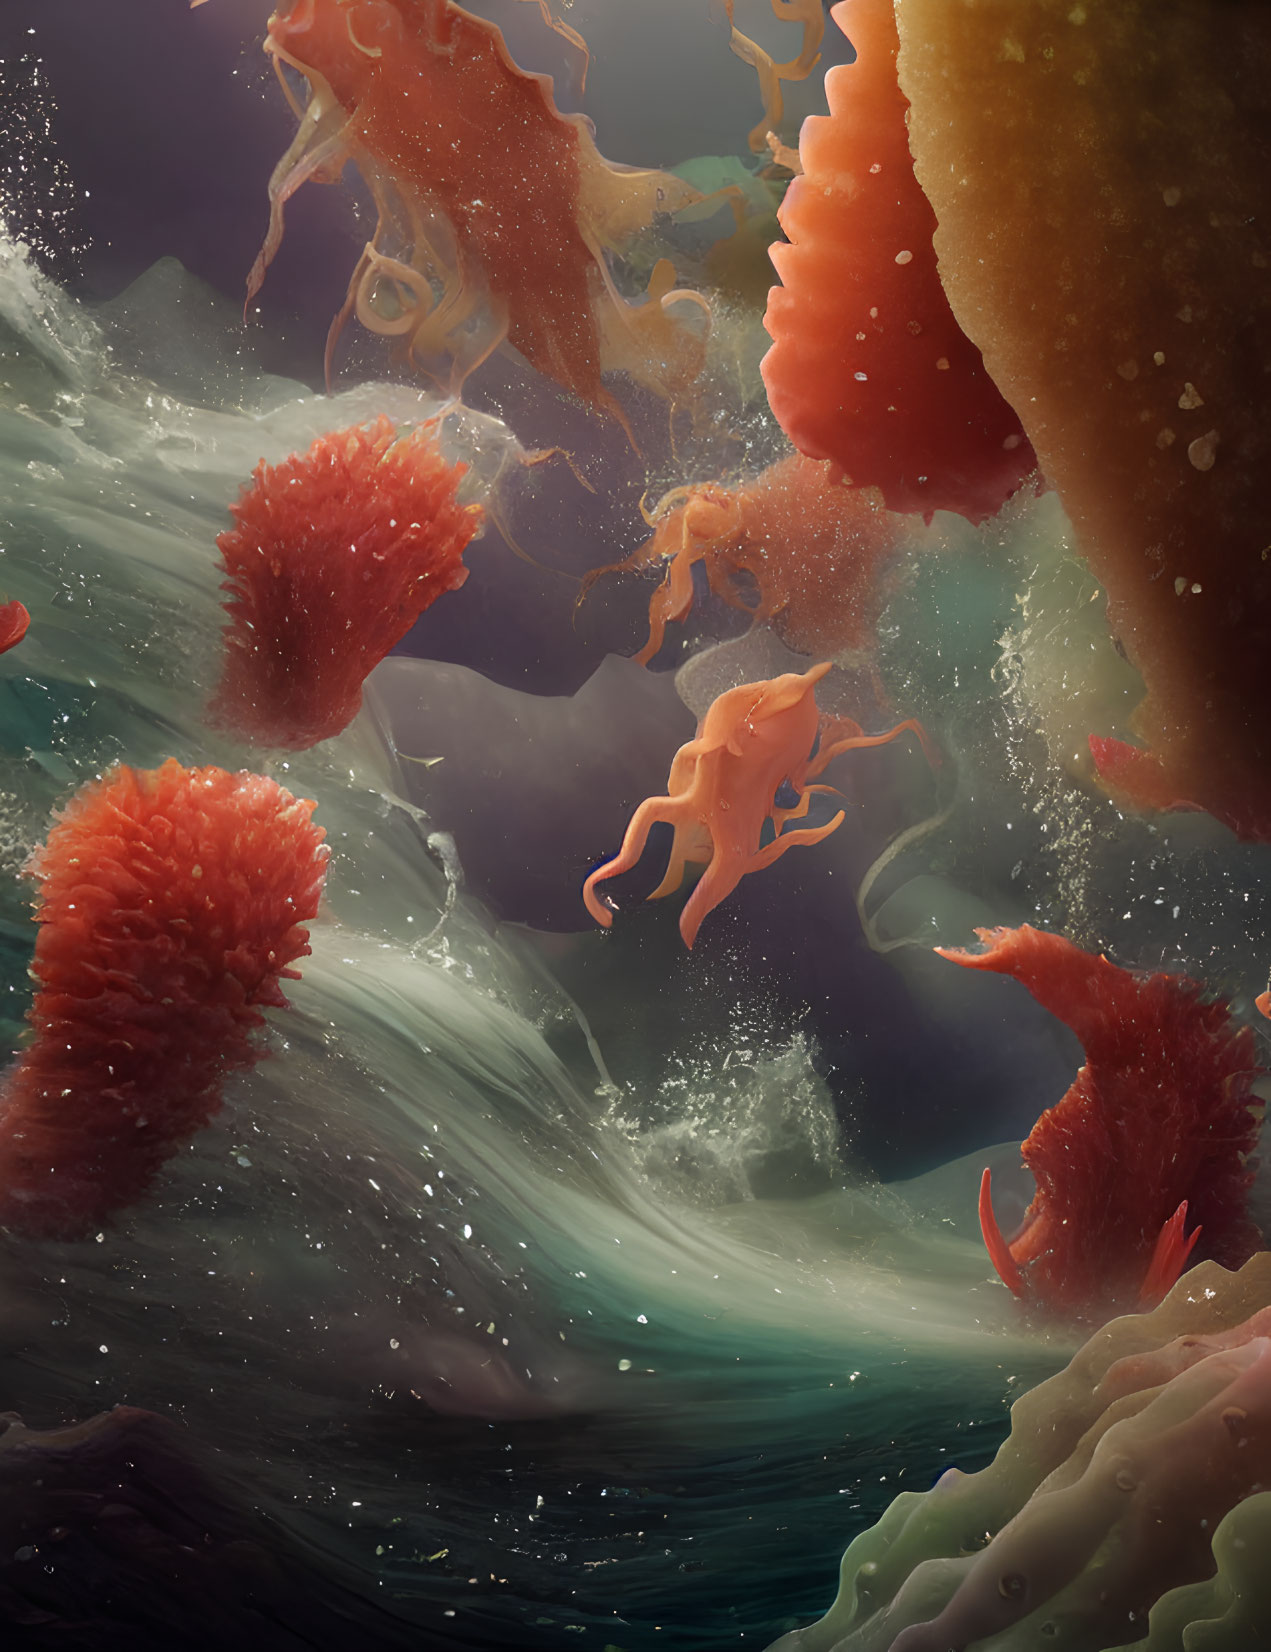 Vibrant underwater scene with floating jellyfish-like creatures and coral structures in oranges and reds